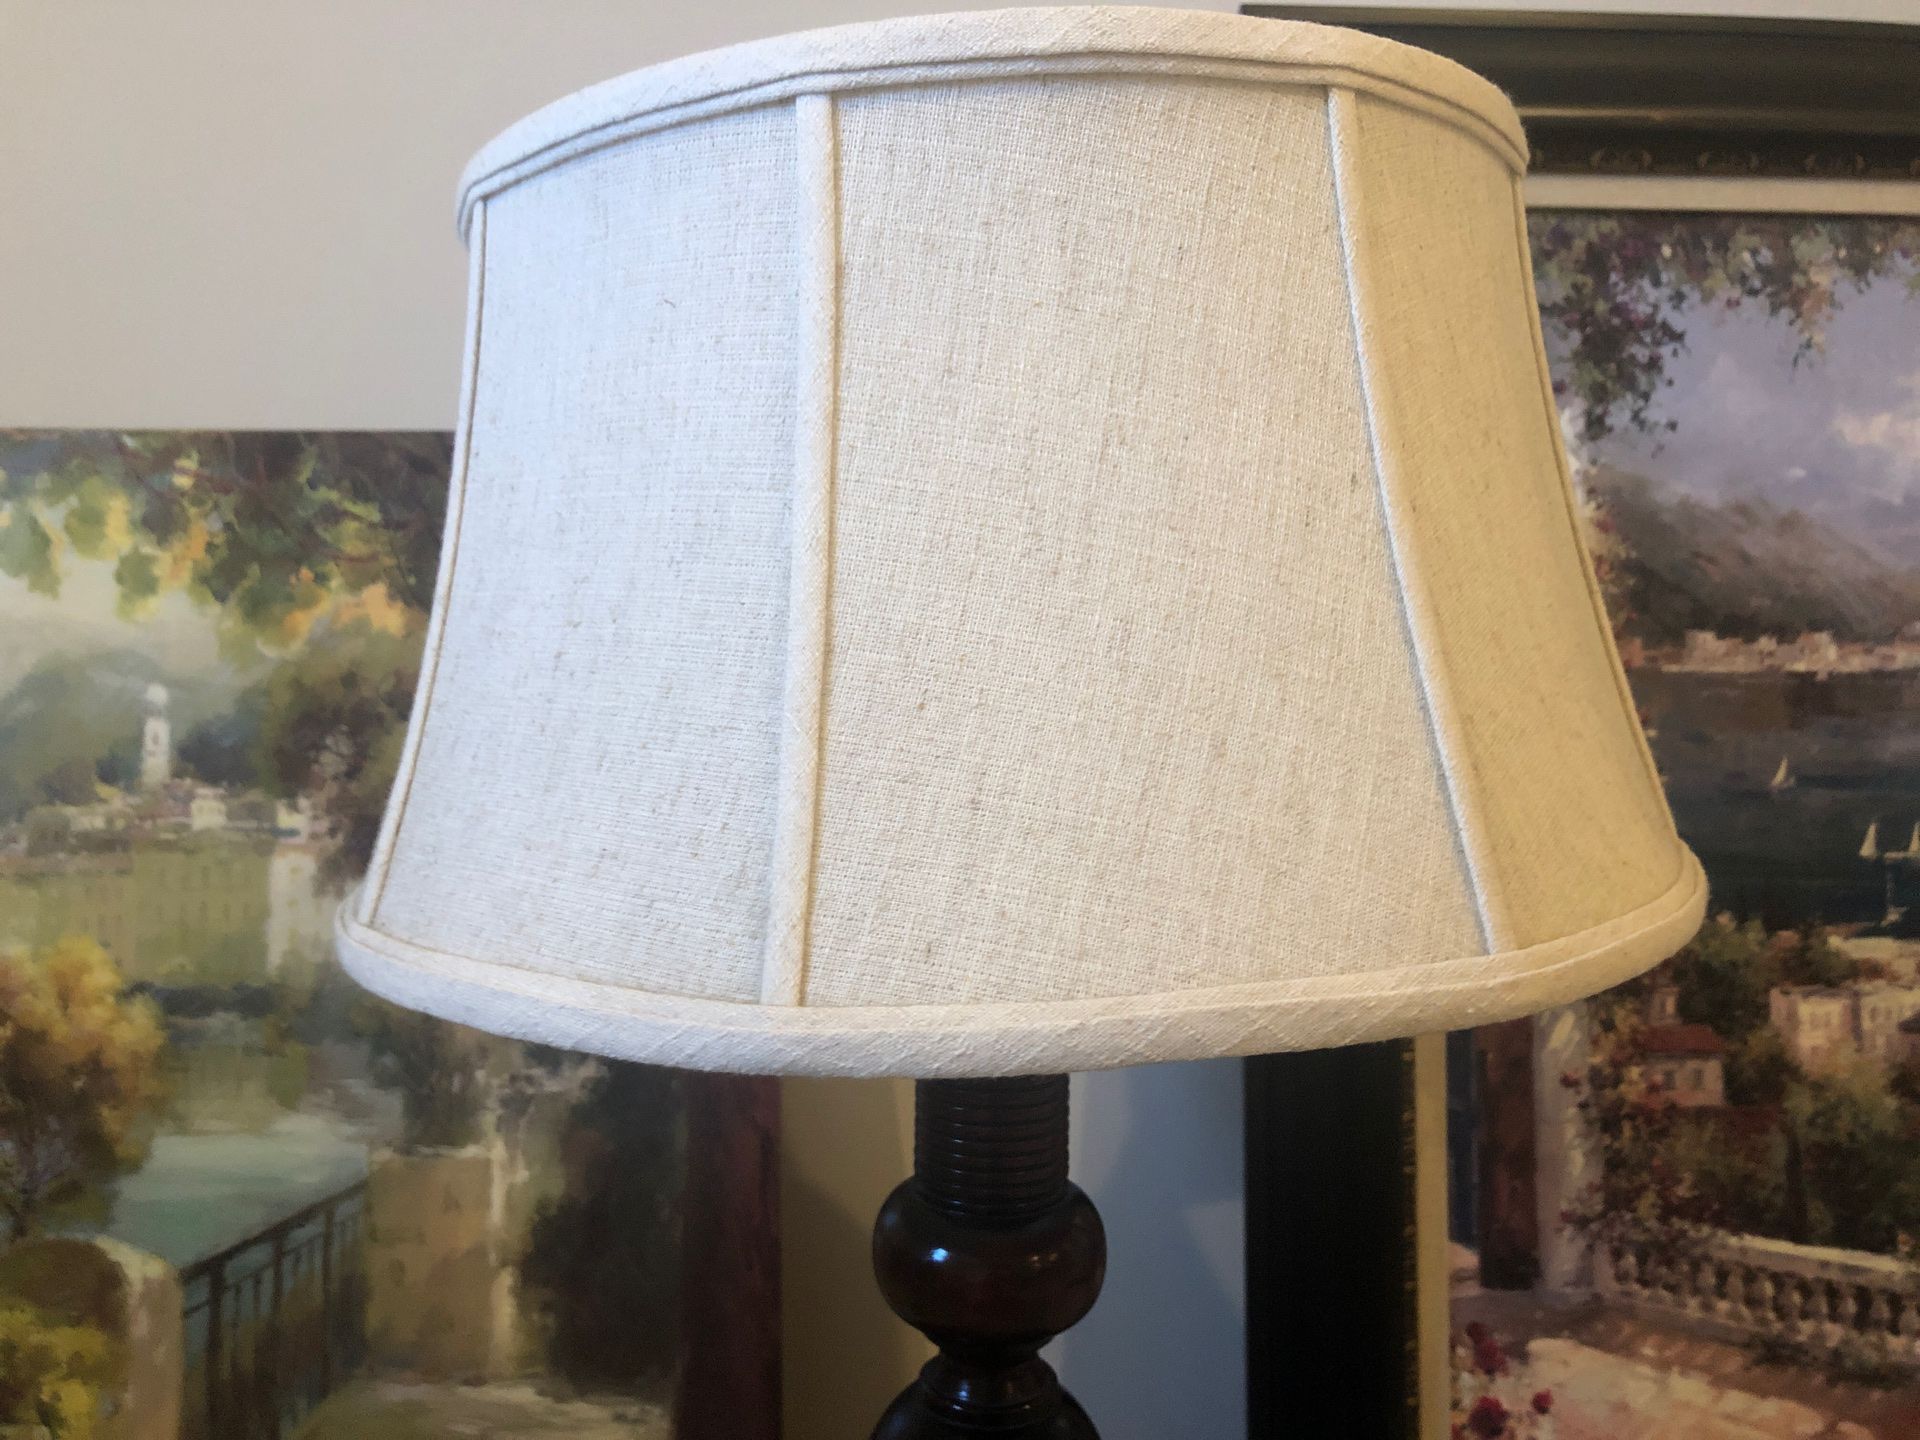 Ethan Allen Table lamp with wood base